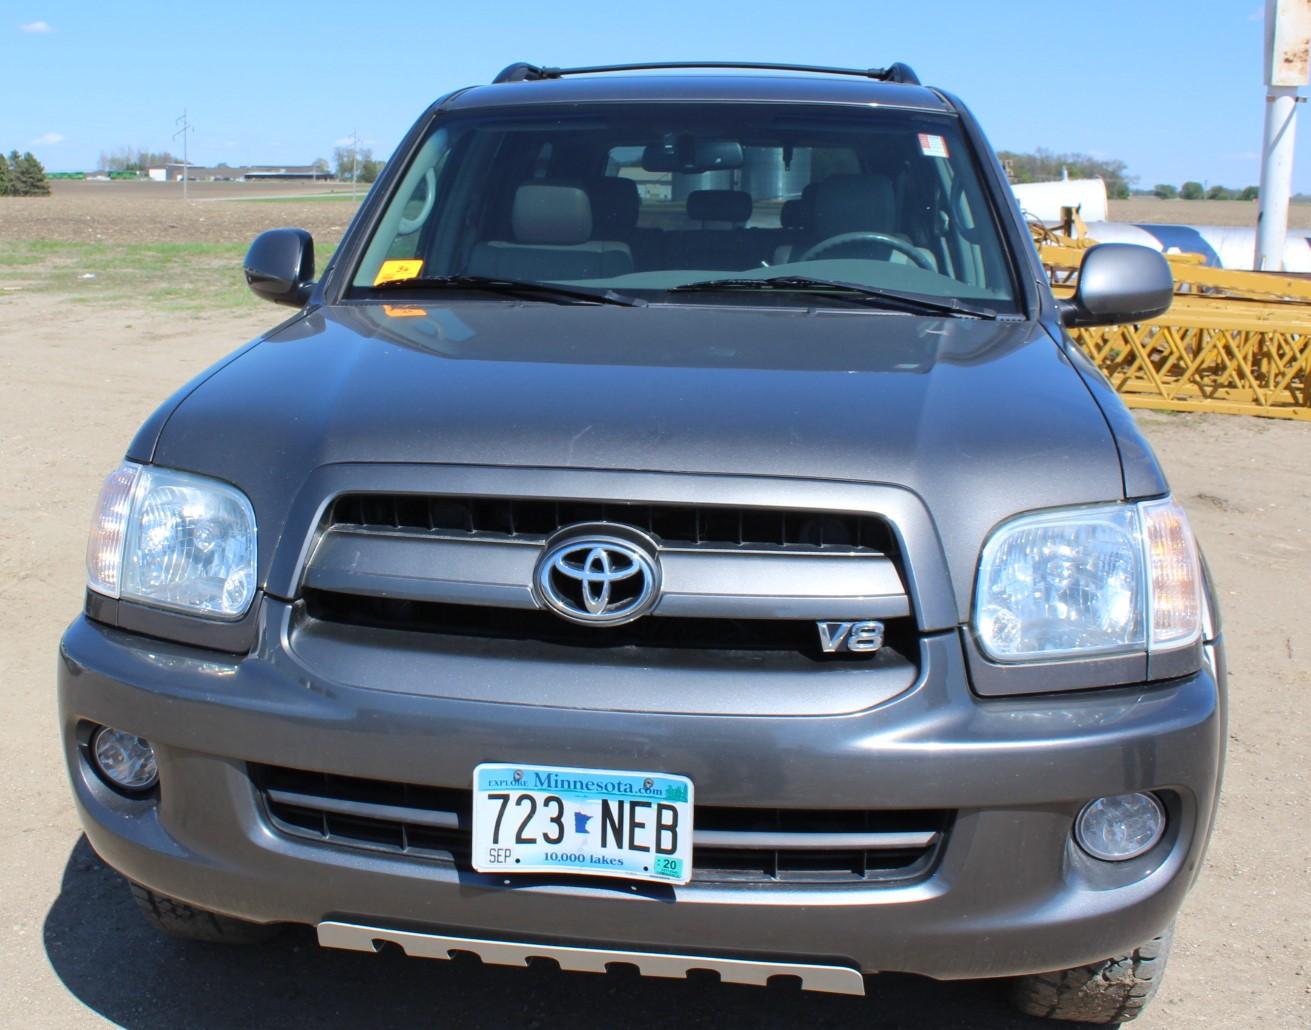 2007 Toyota Sequoia SR5 4x4, iForce 4.7L V8, Auto Trans, Leather Bucket Front Seats,